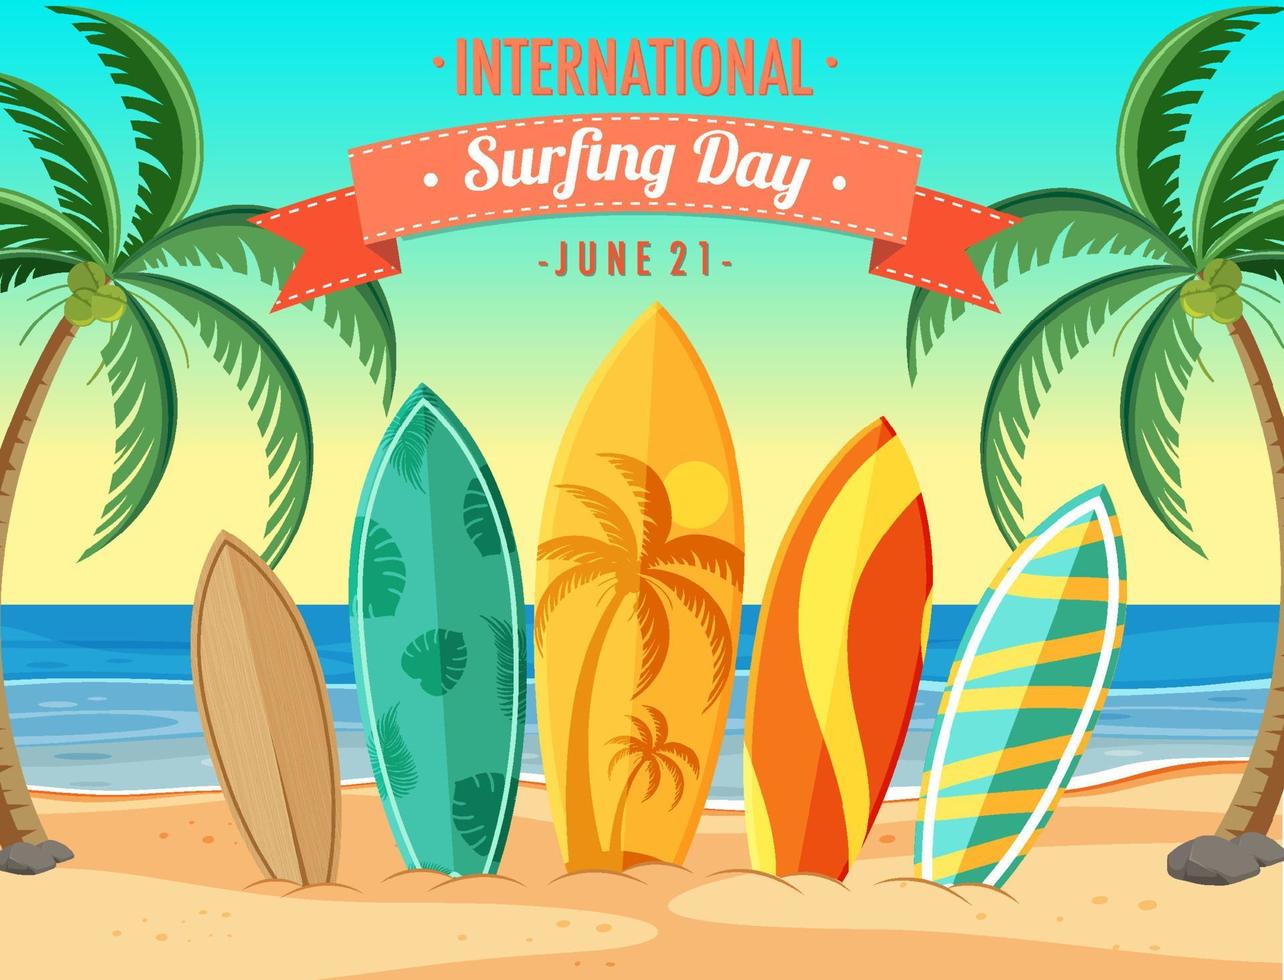 International Surfing Day banner with many surfboards on the beach vector